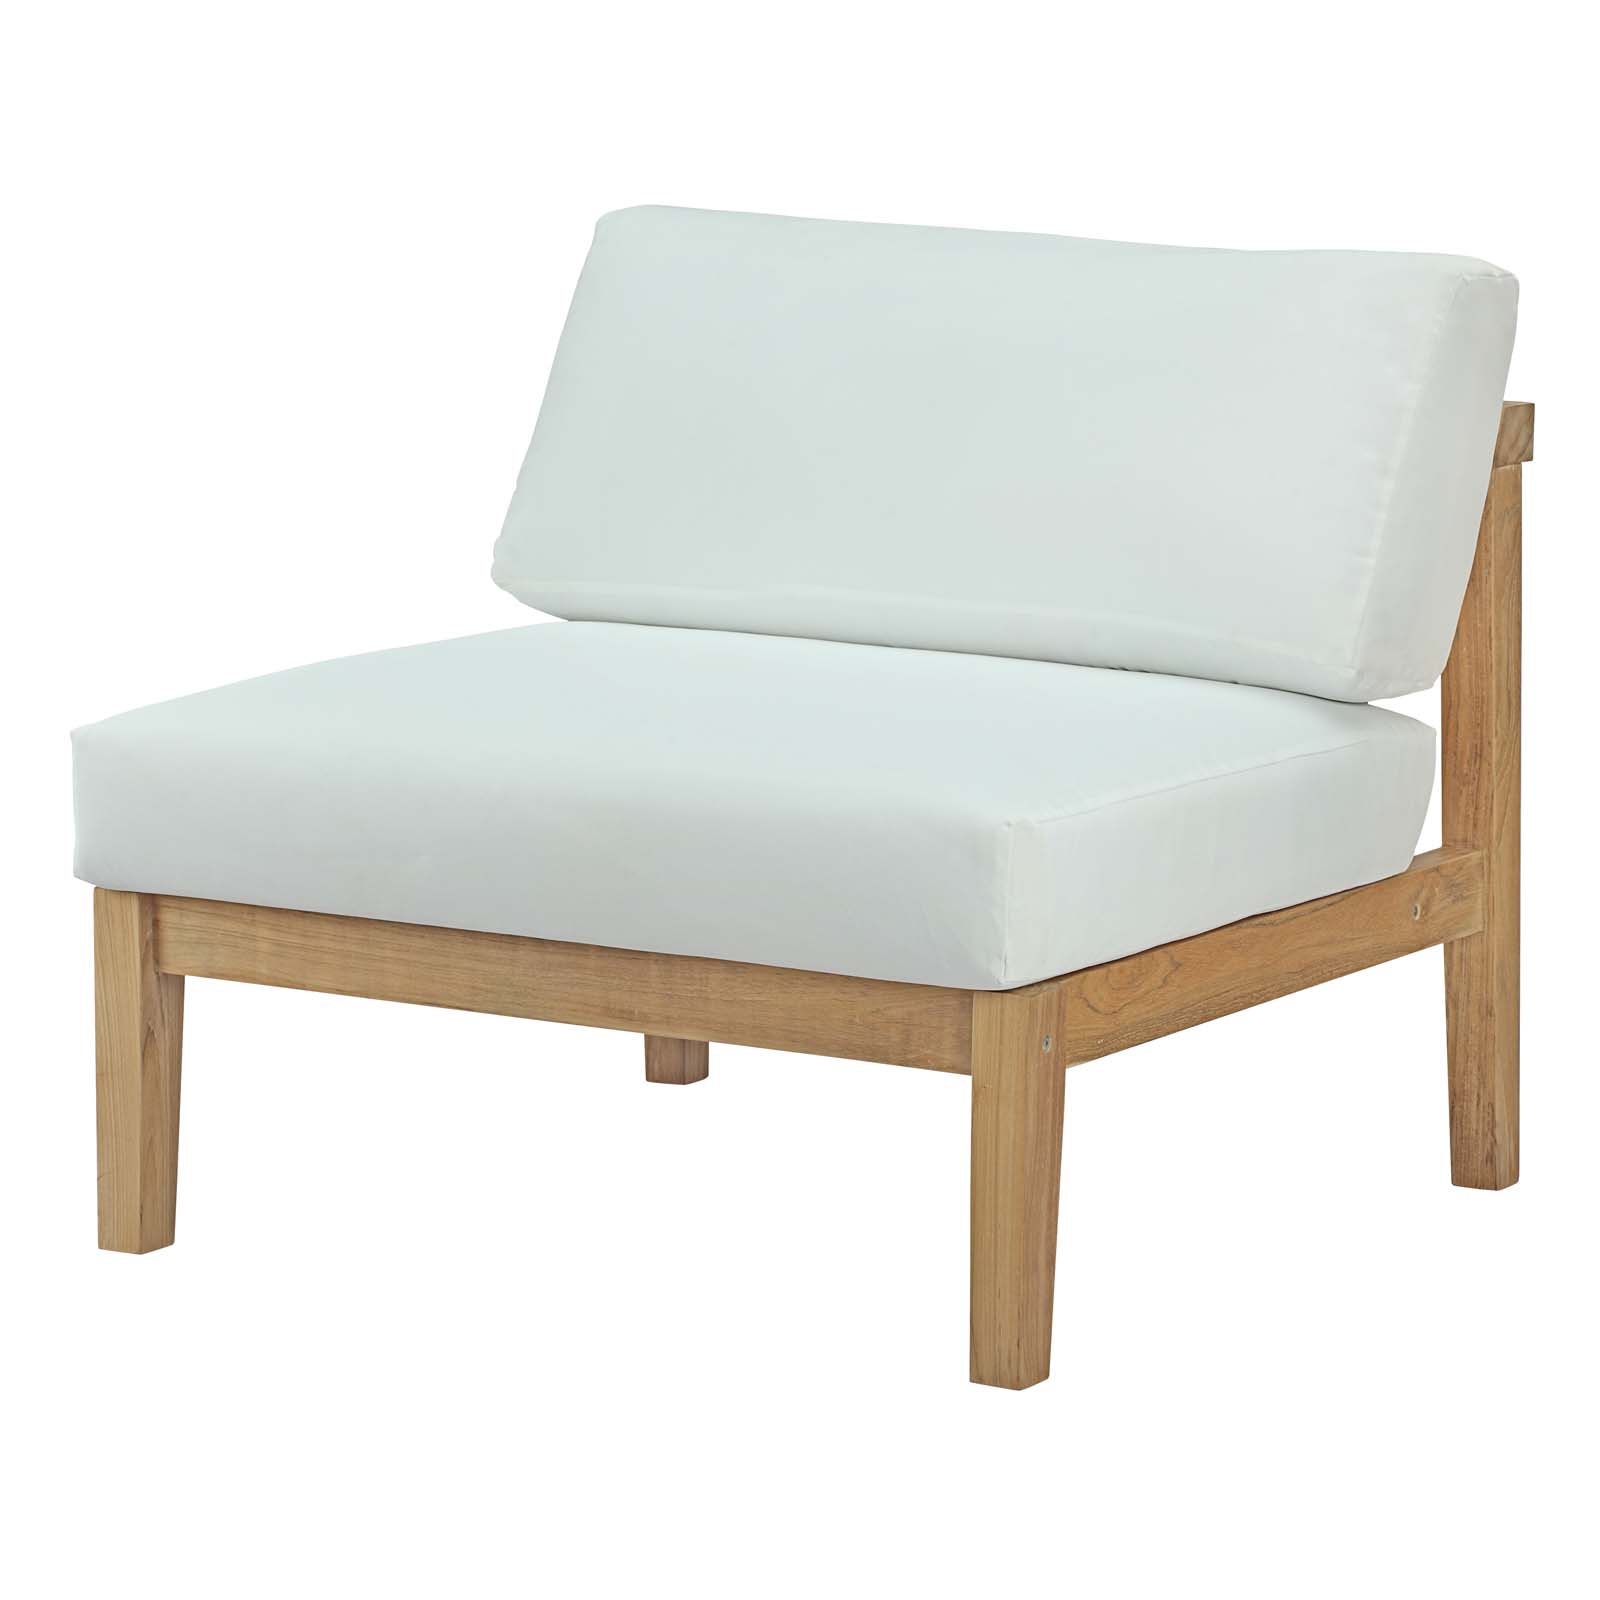 Modern Contemporary Urban Design Outdoor Patio Balcony Garden Furniture Lounge Chair, Sofa and Table Set, Wood, White Natural - image 3 of 8